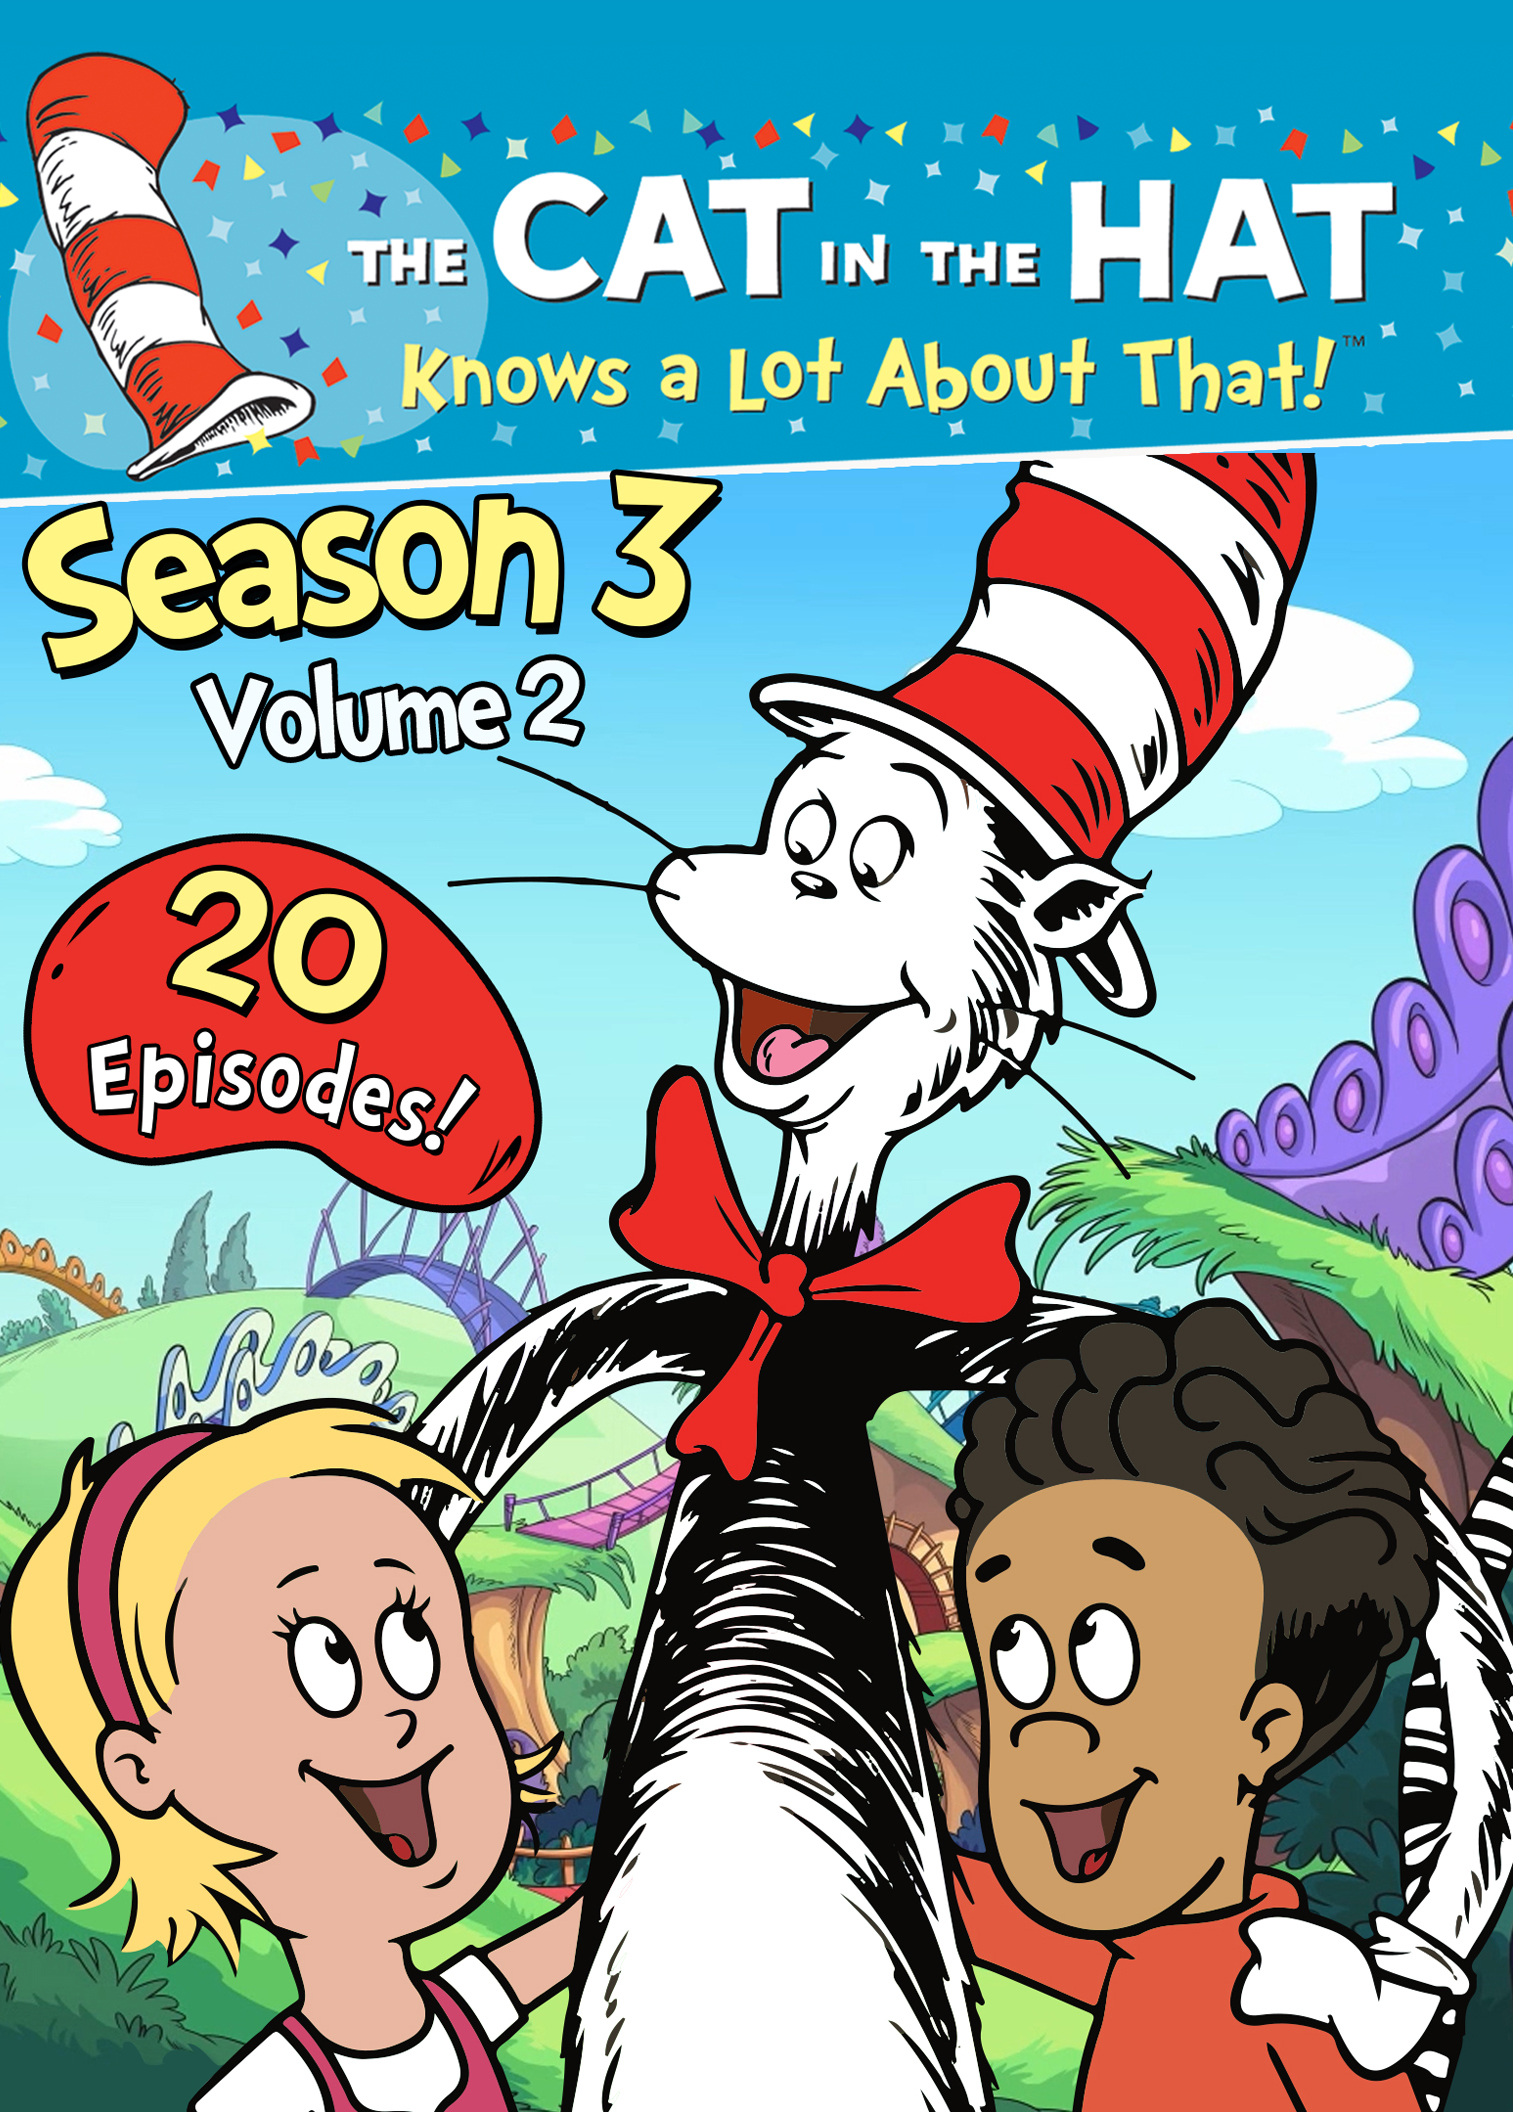 The Cat In The Hat Knows A Lot About That Season 3 Vol 2 Dvd Best Buy